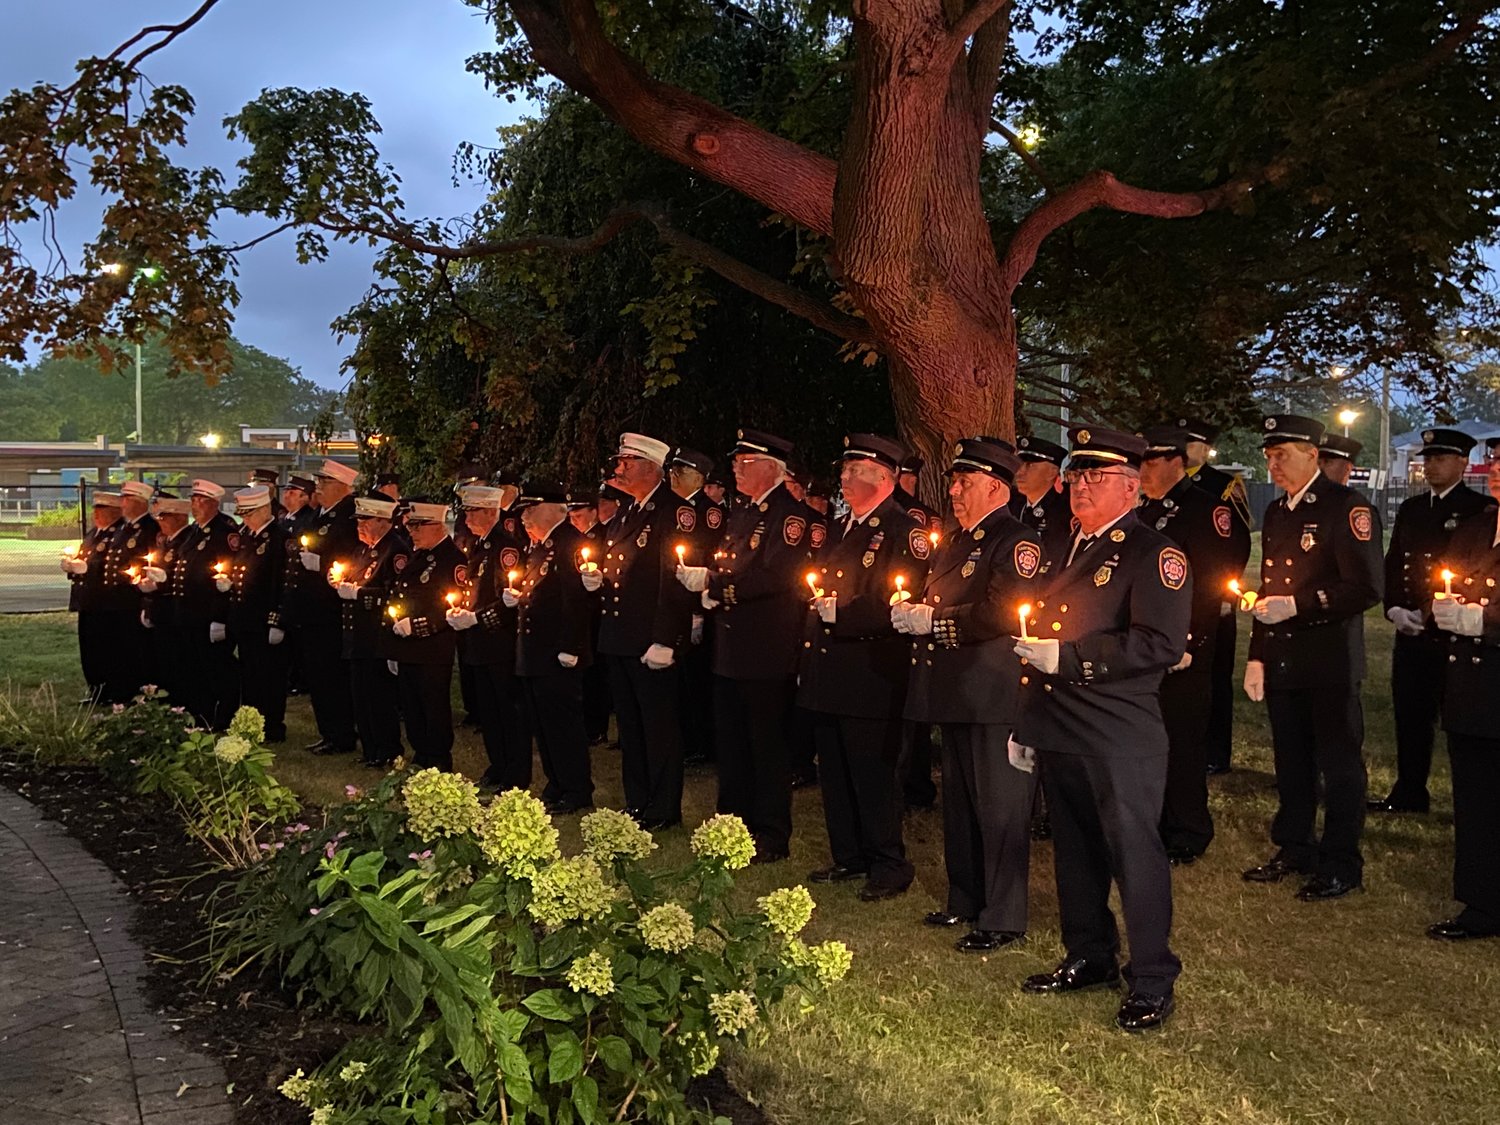 Members of the EMFD held their candles in honor of those who sacrificed their lives on 9/11 at the ceremony hosted by the fire department on Sept. 11.